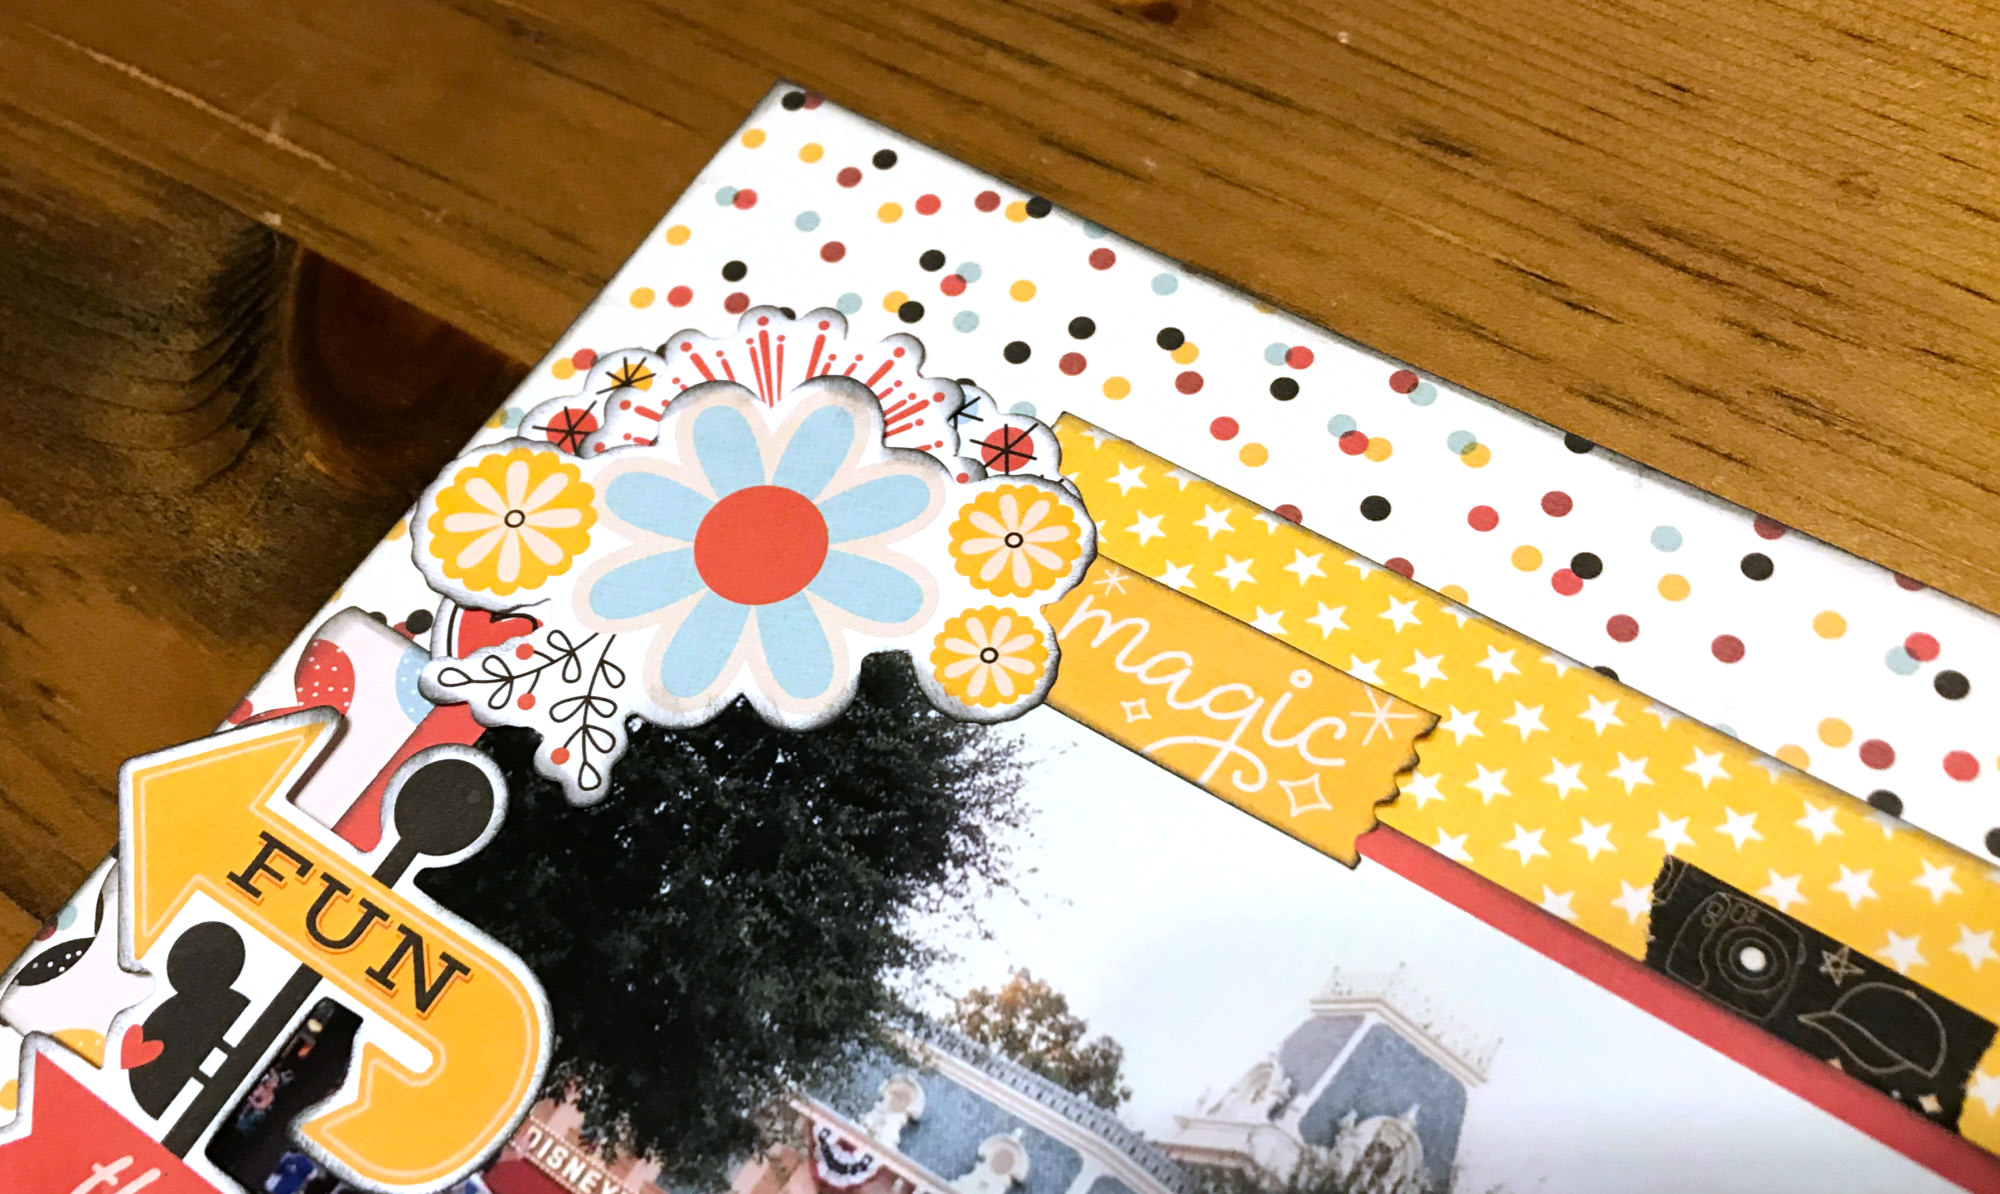 Details of Disney Themed Scrapbook Layout featuring Simple Stories designed by Katelyn Grosart